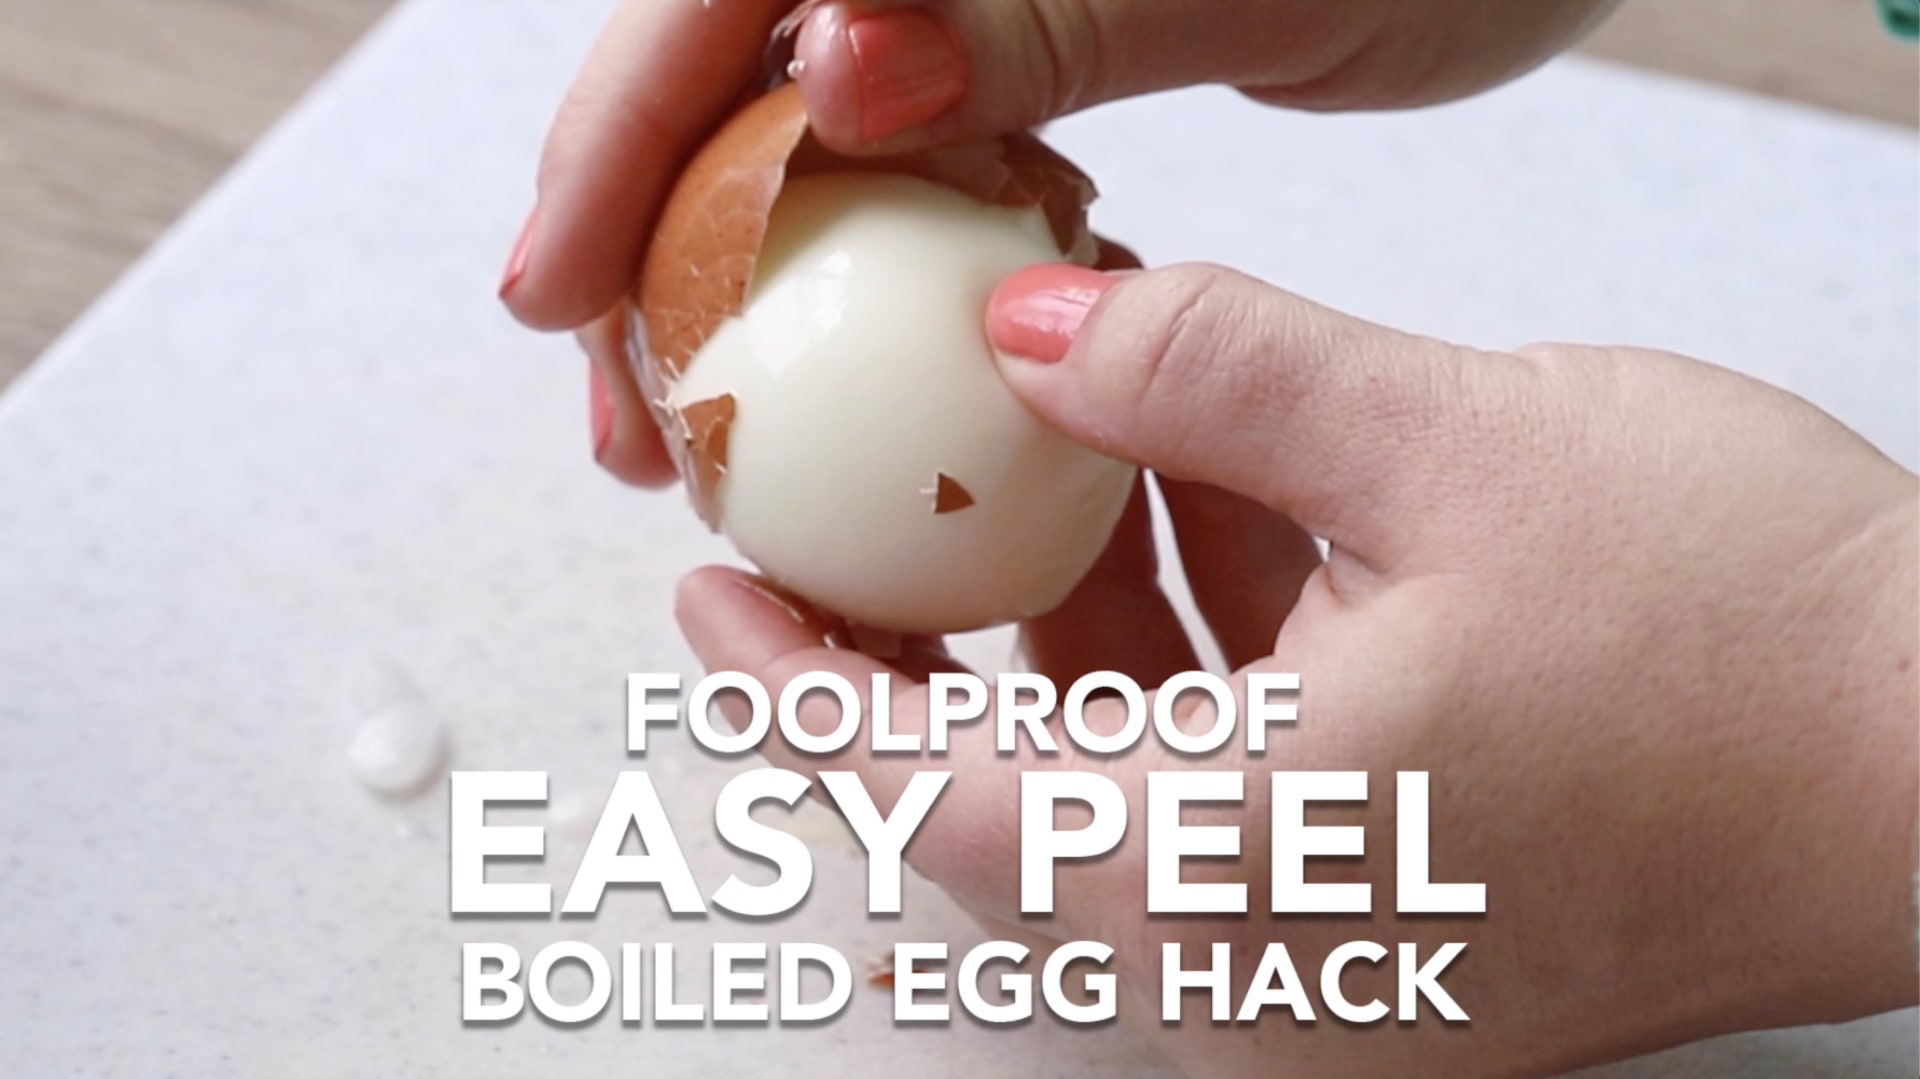 How to Quickly Peel a Boiled Egg in 3 seconds - Tips and tricks - DIY 